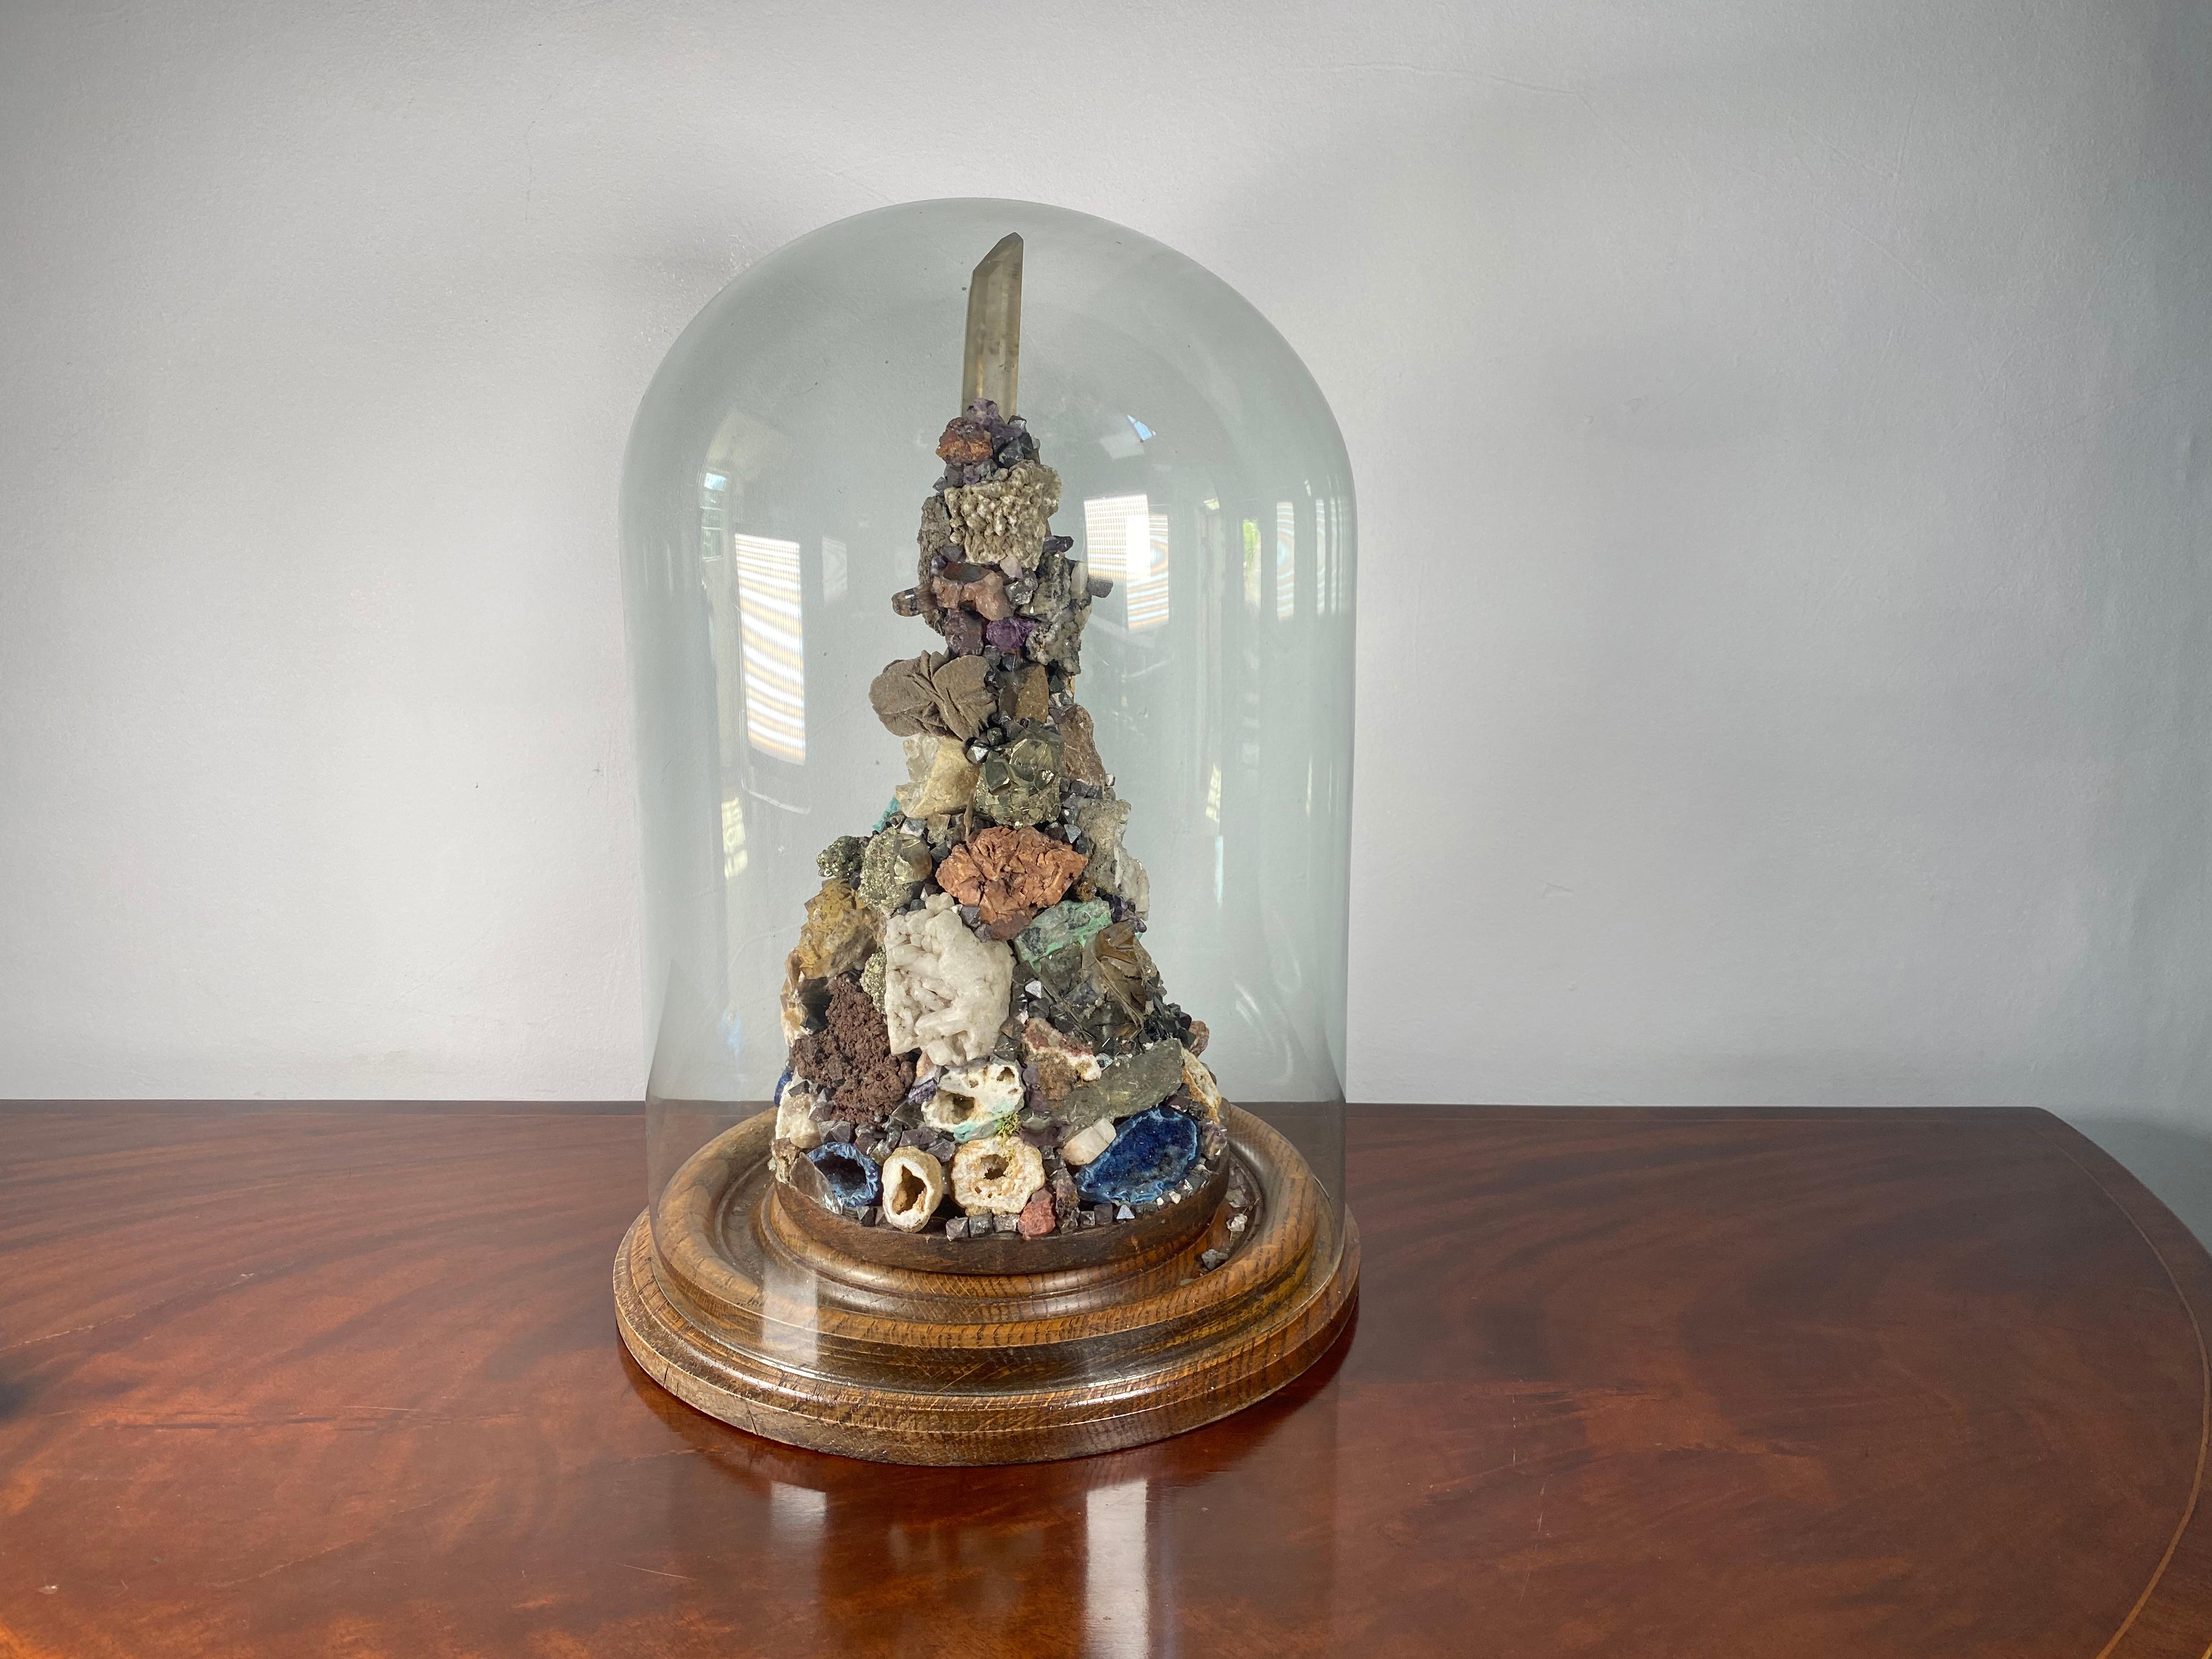 This incredible speciamn display has a vast assortment of various minerals all displayed proudly under a glass dome.